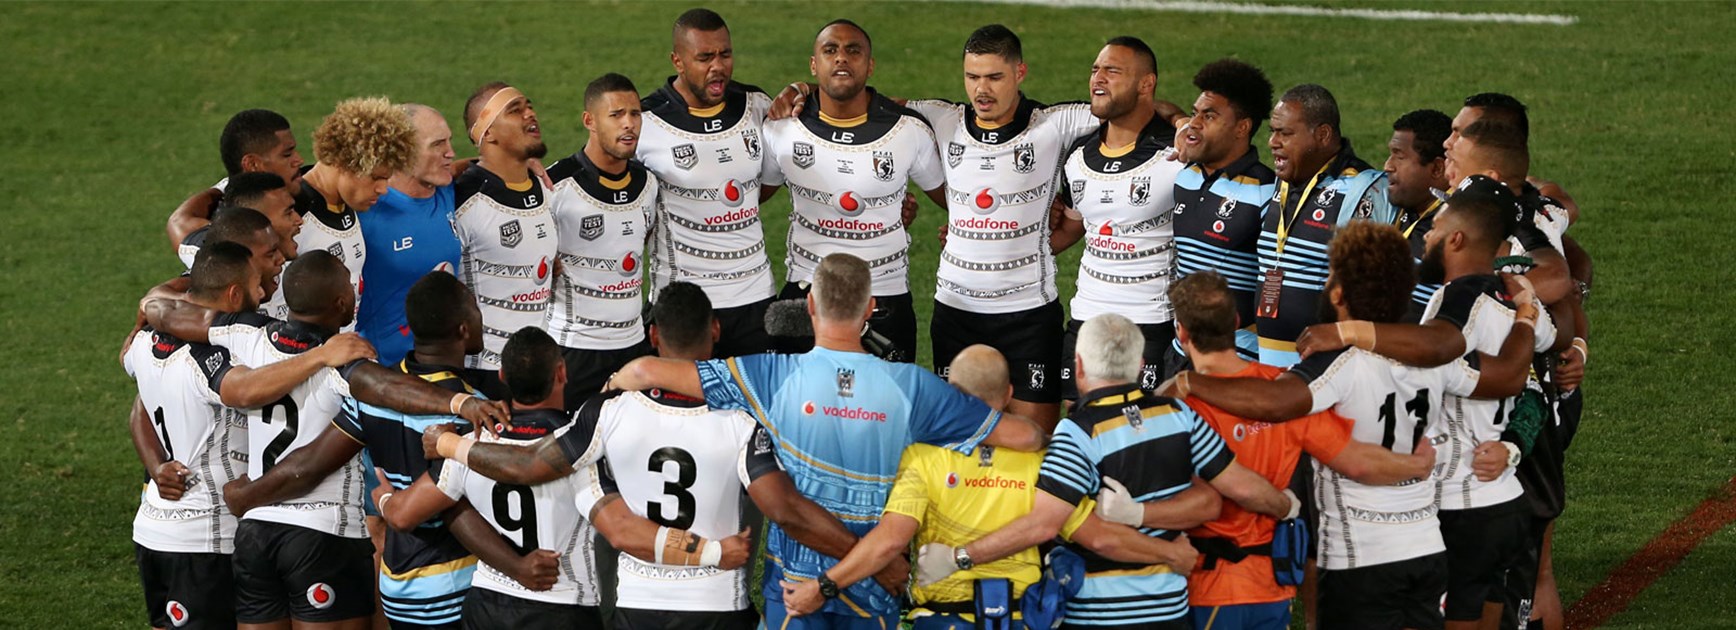 The Fiji team sings their pre-game hymn before their clash with Papua New Guinea on Saturday.